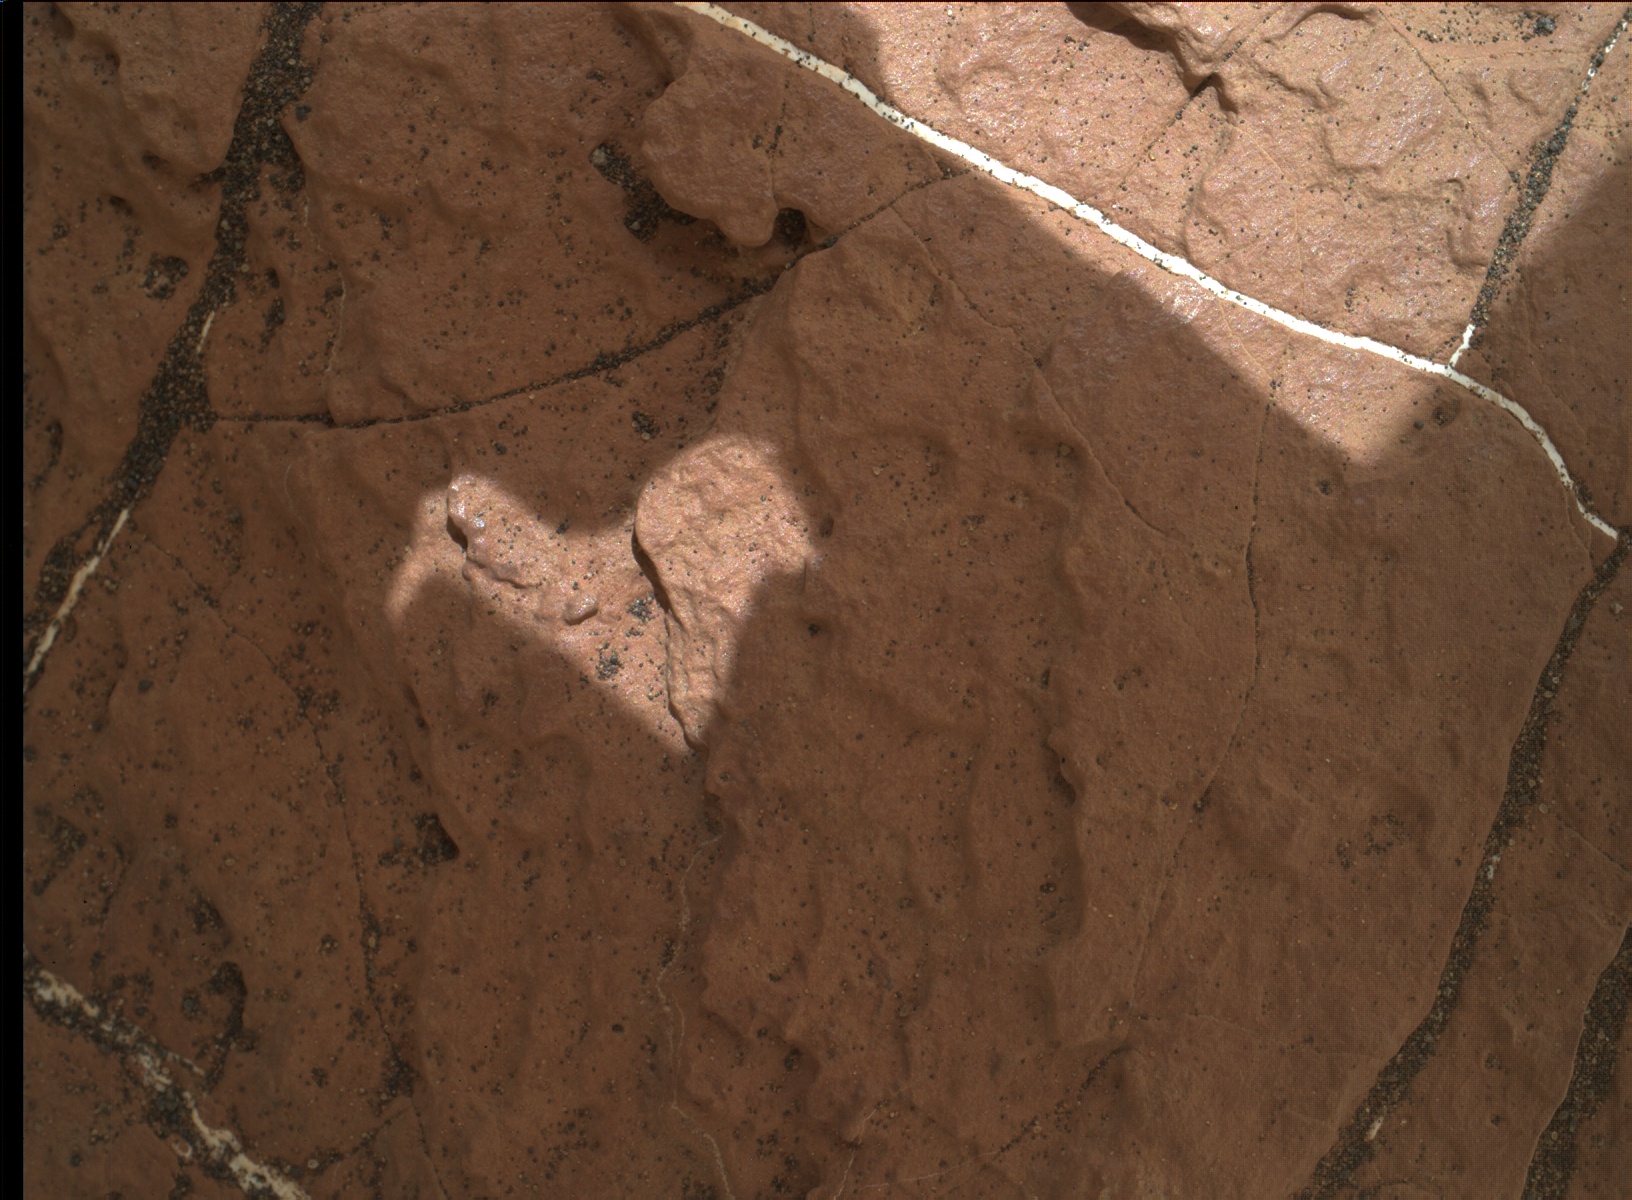 Nasa's Mars rover Curiosity acquired this image using its Mars Hand Lens Imager (MAHLI) on Sol 1596